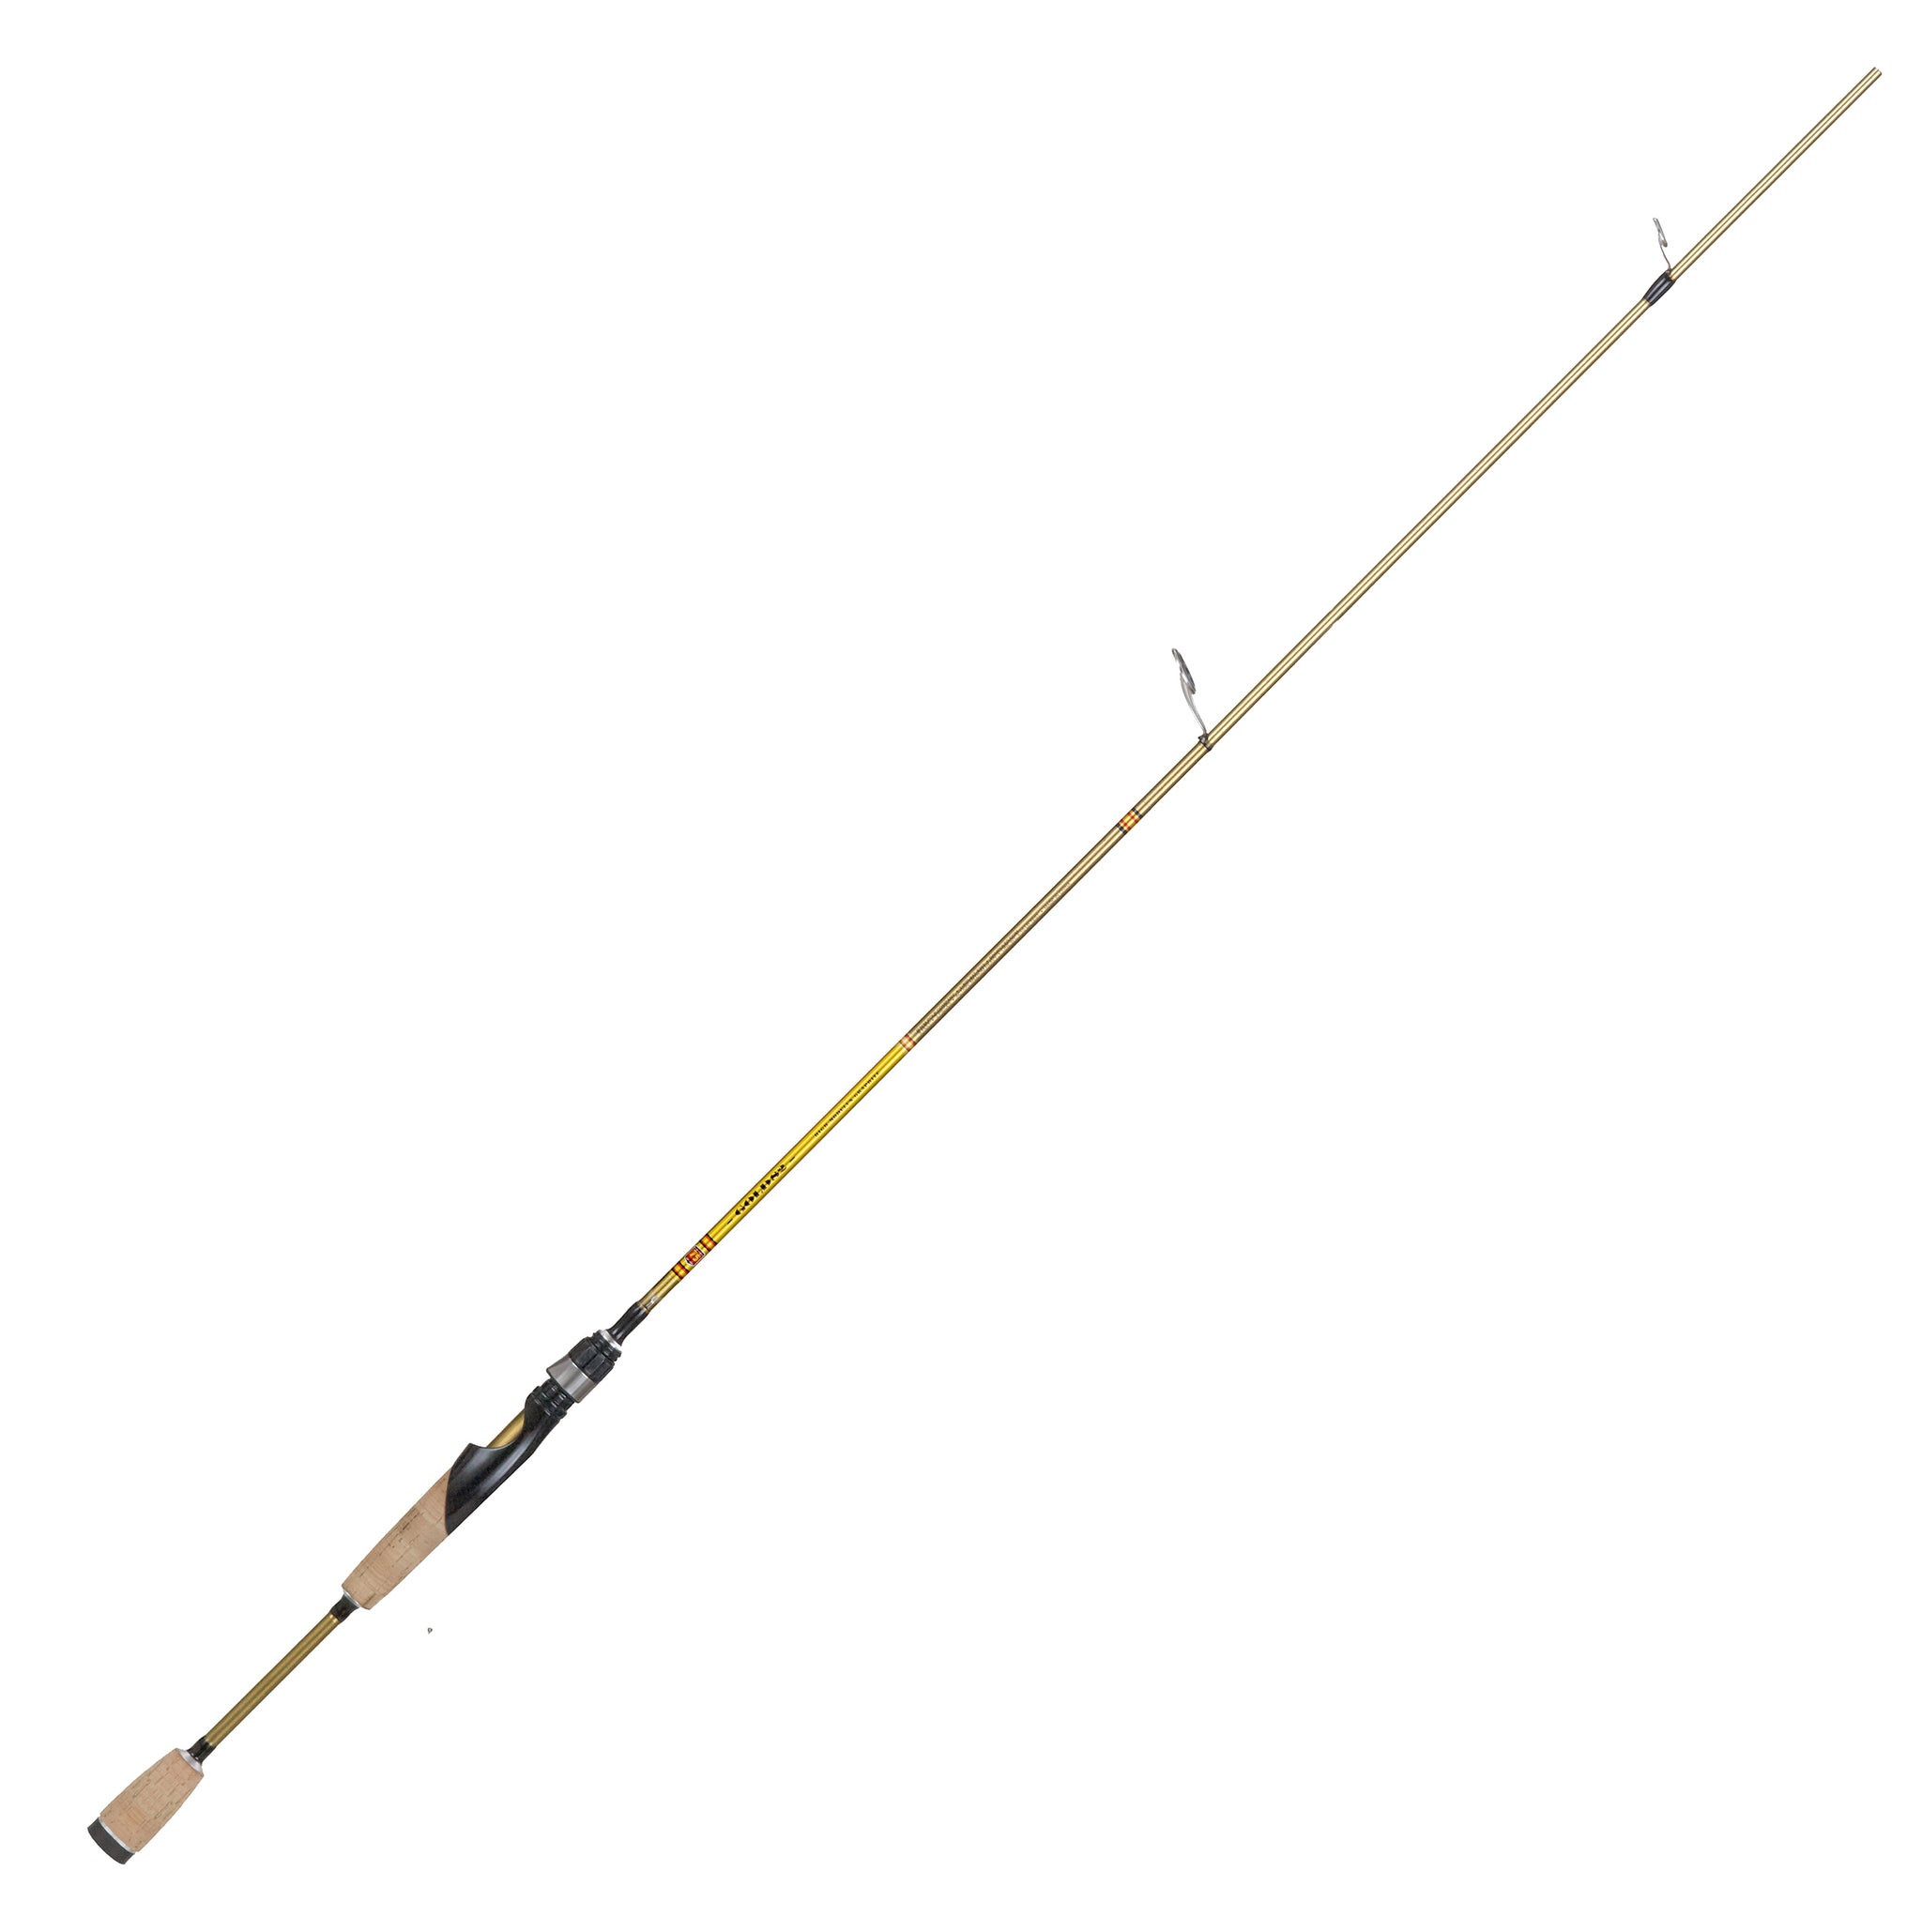 Buck’s Gold Jig Pole - Redesigned